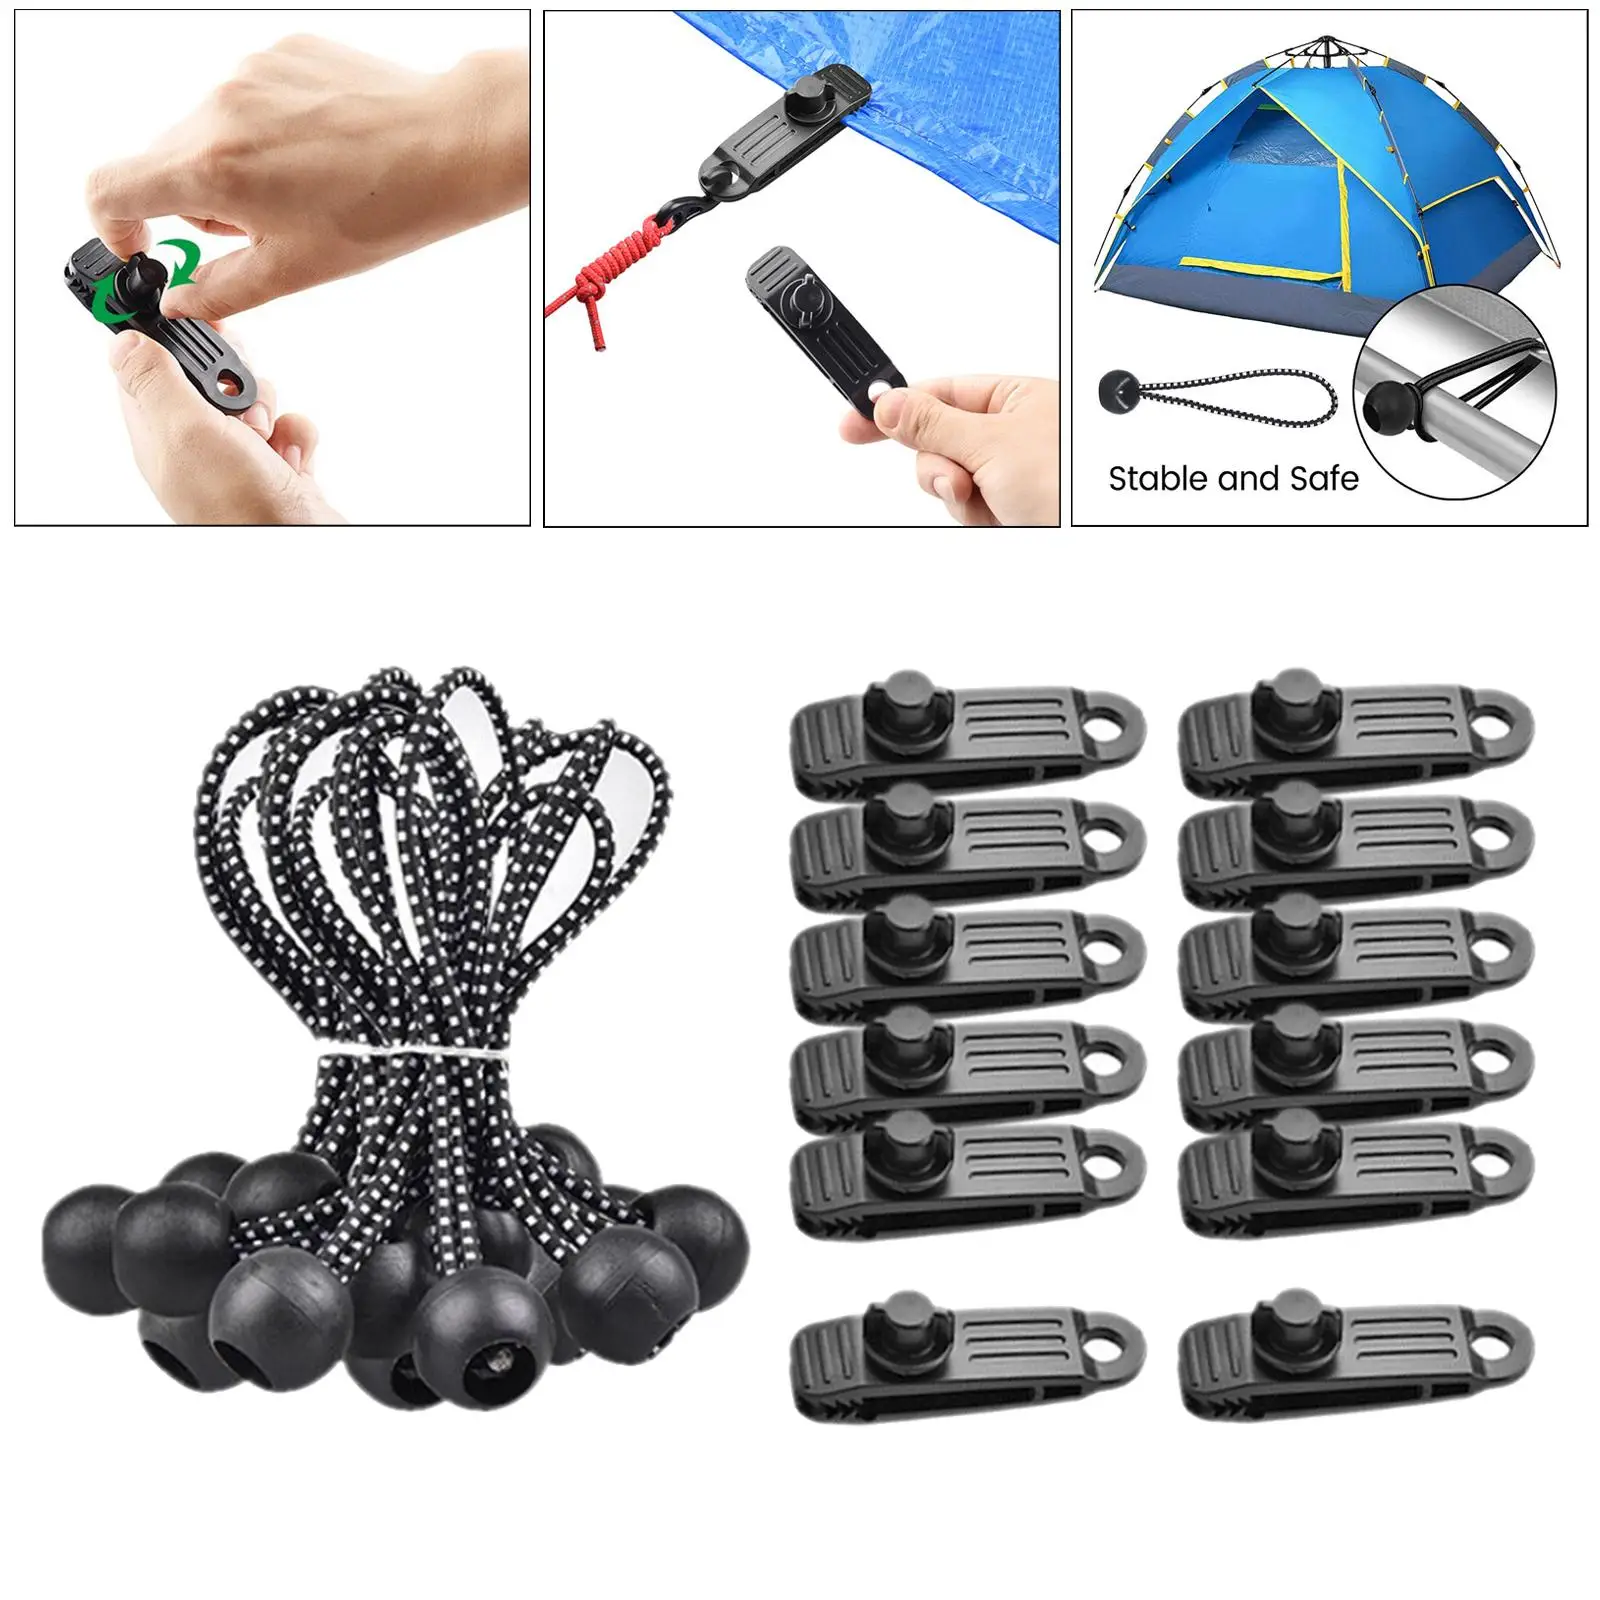 Tarp Clips Lock Grip Tarp Clamps Tent Fasteners Clips Holder